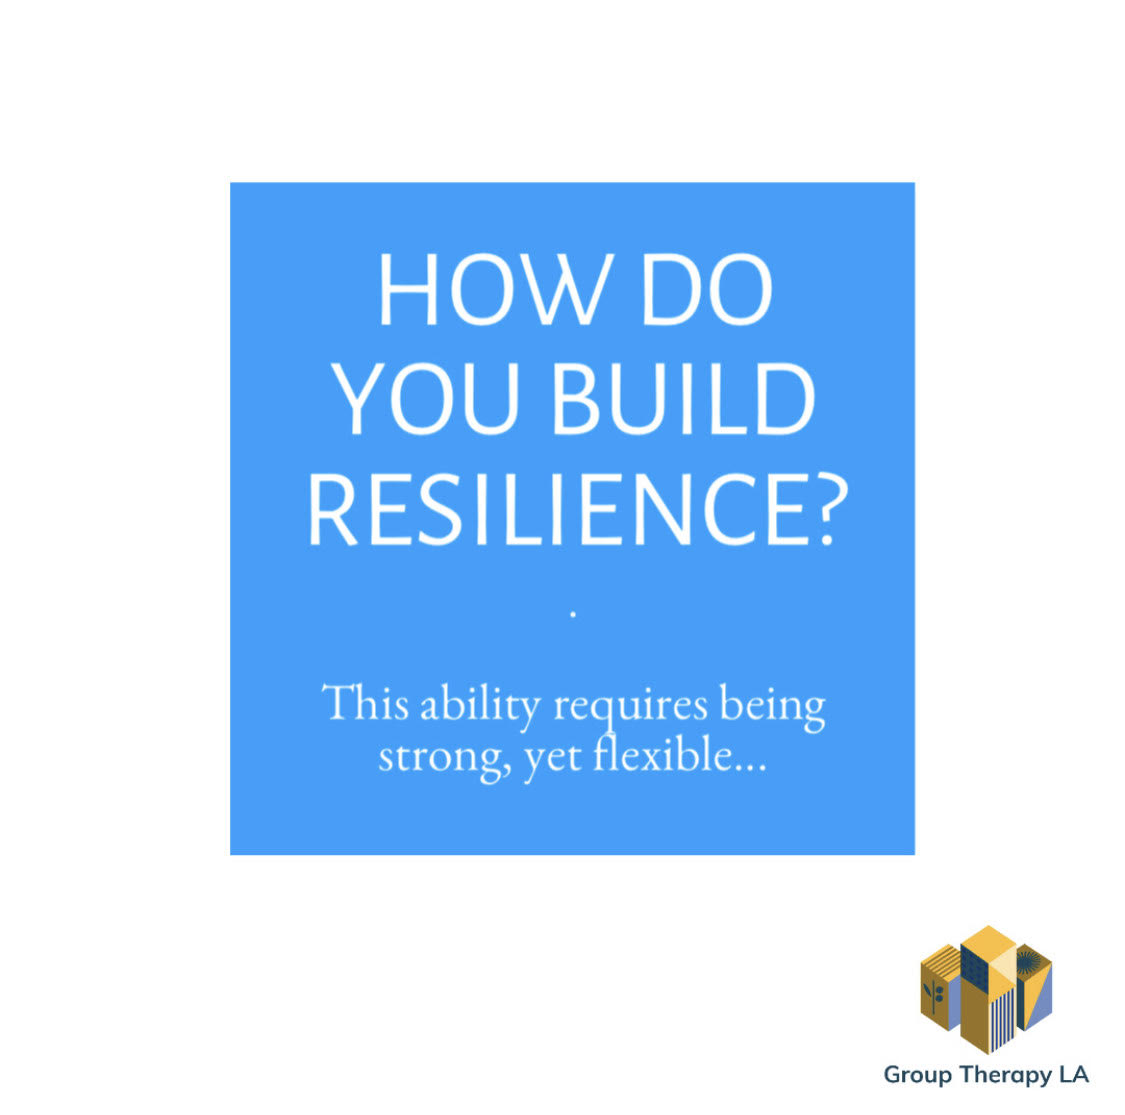 How do you build resilience?